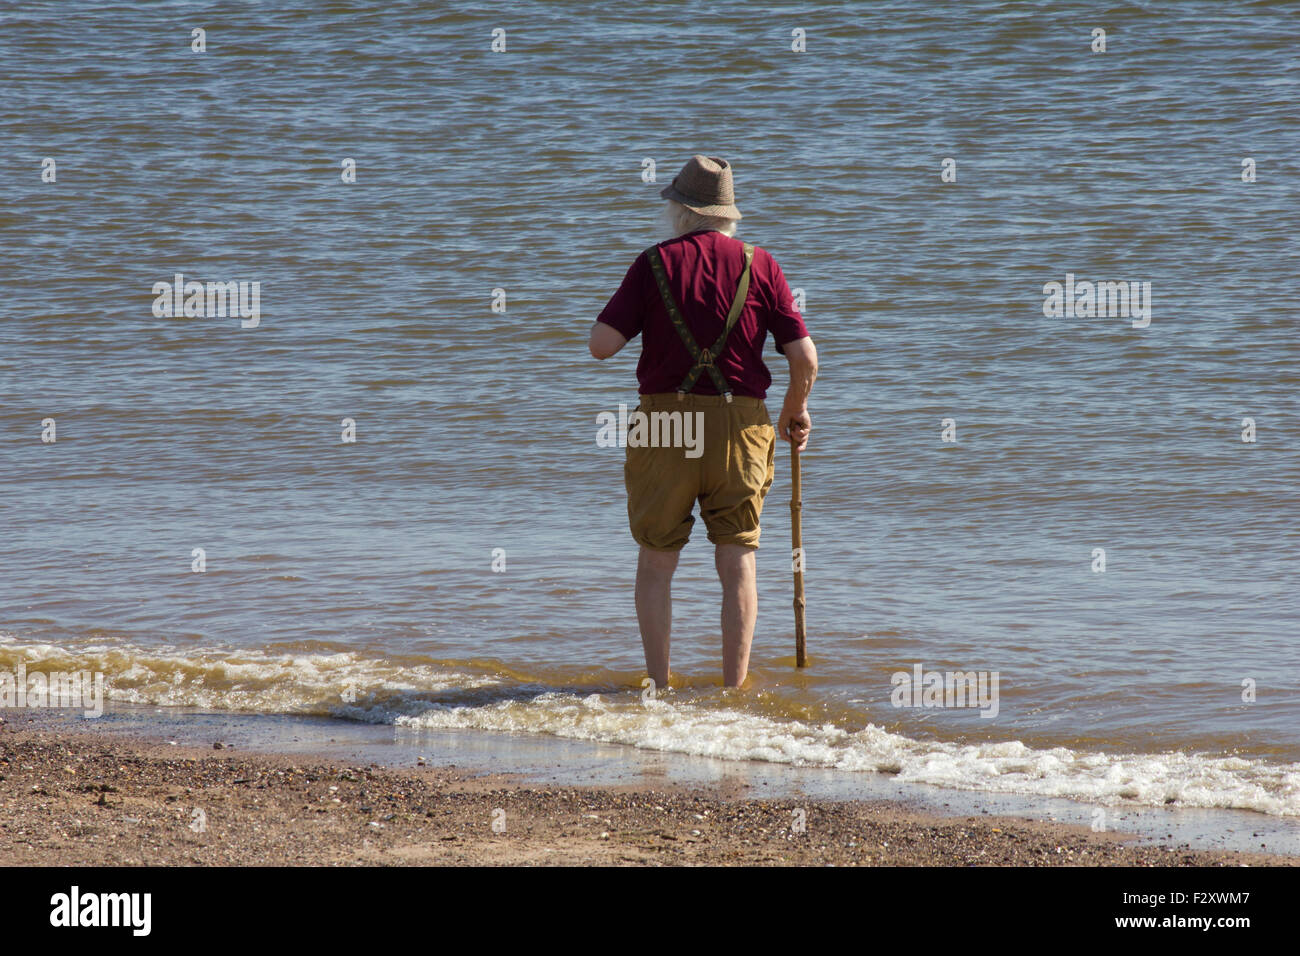 An elderly man wearing a hat carrying a walking stick with his trouser legs rolled up paddling in the sea Stock Photo